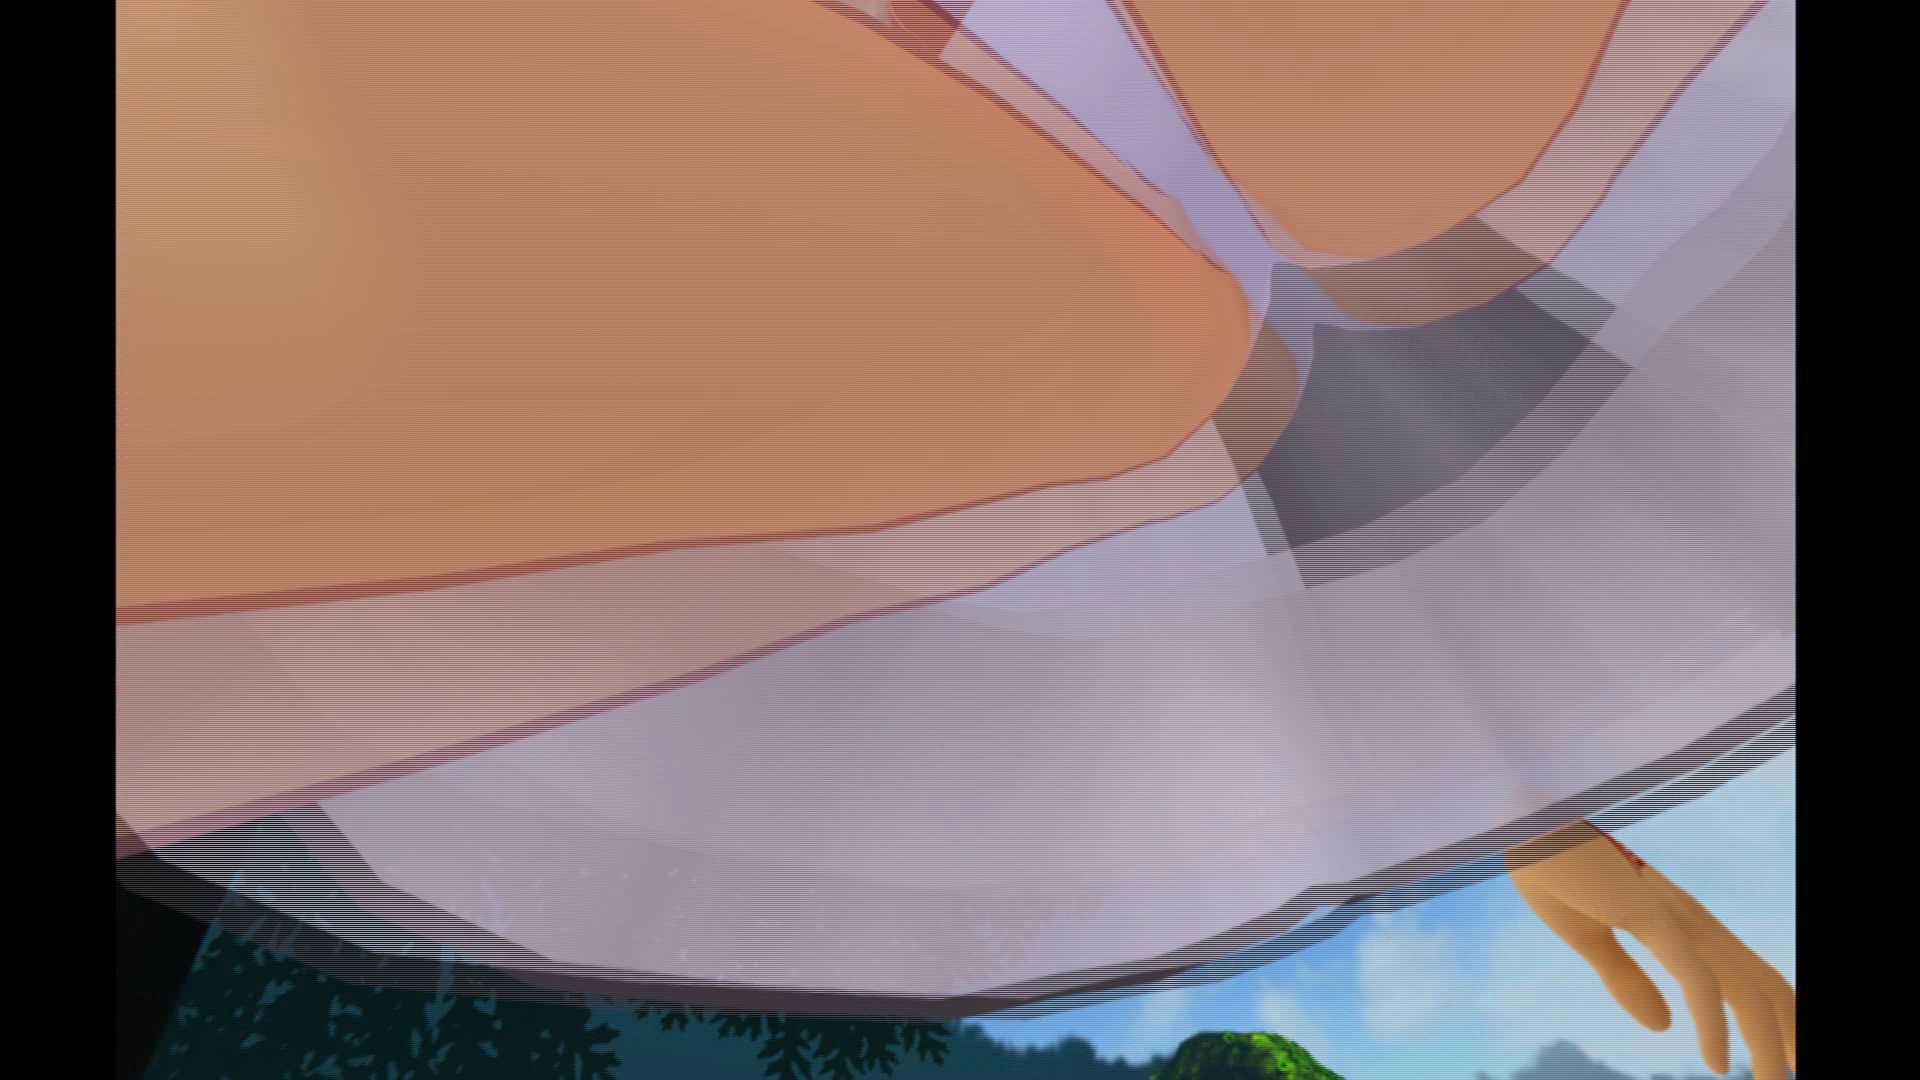 [Fate/Grand order VR] Maschsee underwear and breast! The underwear of the alto rear, too! 30